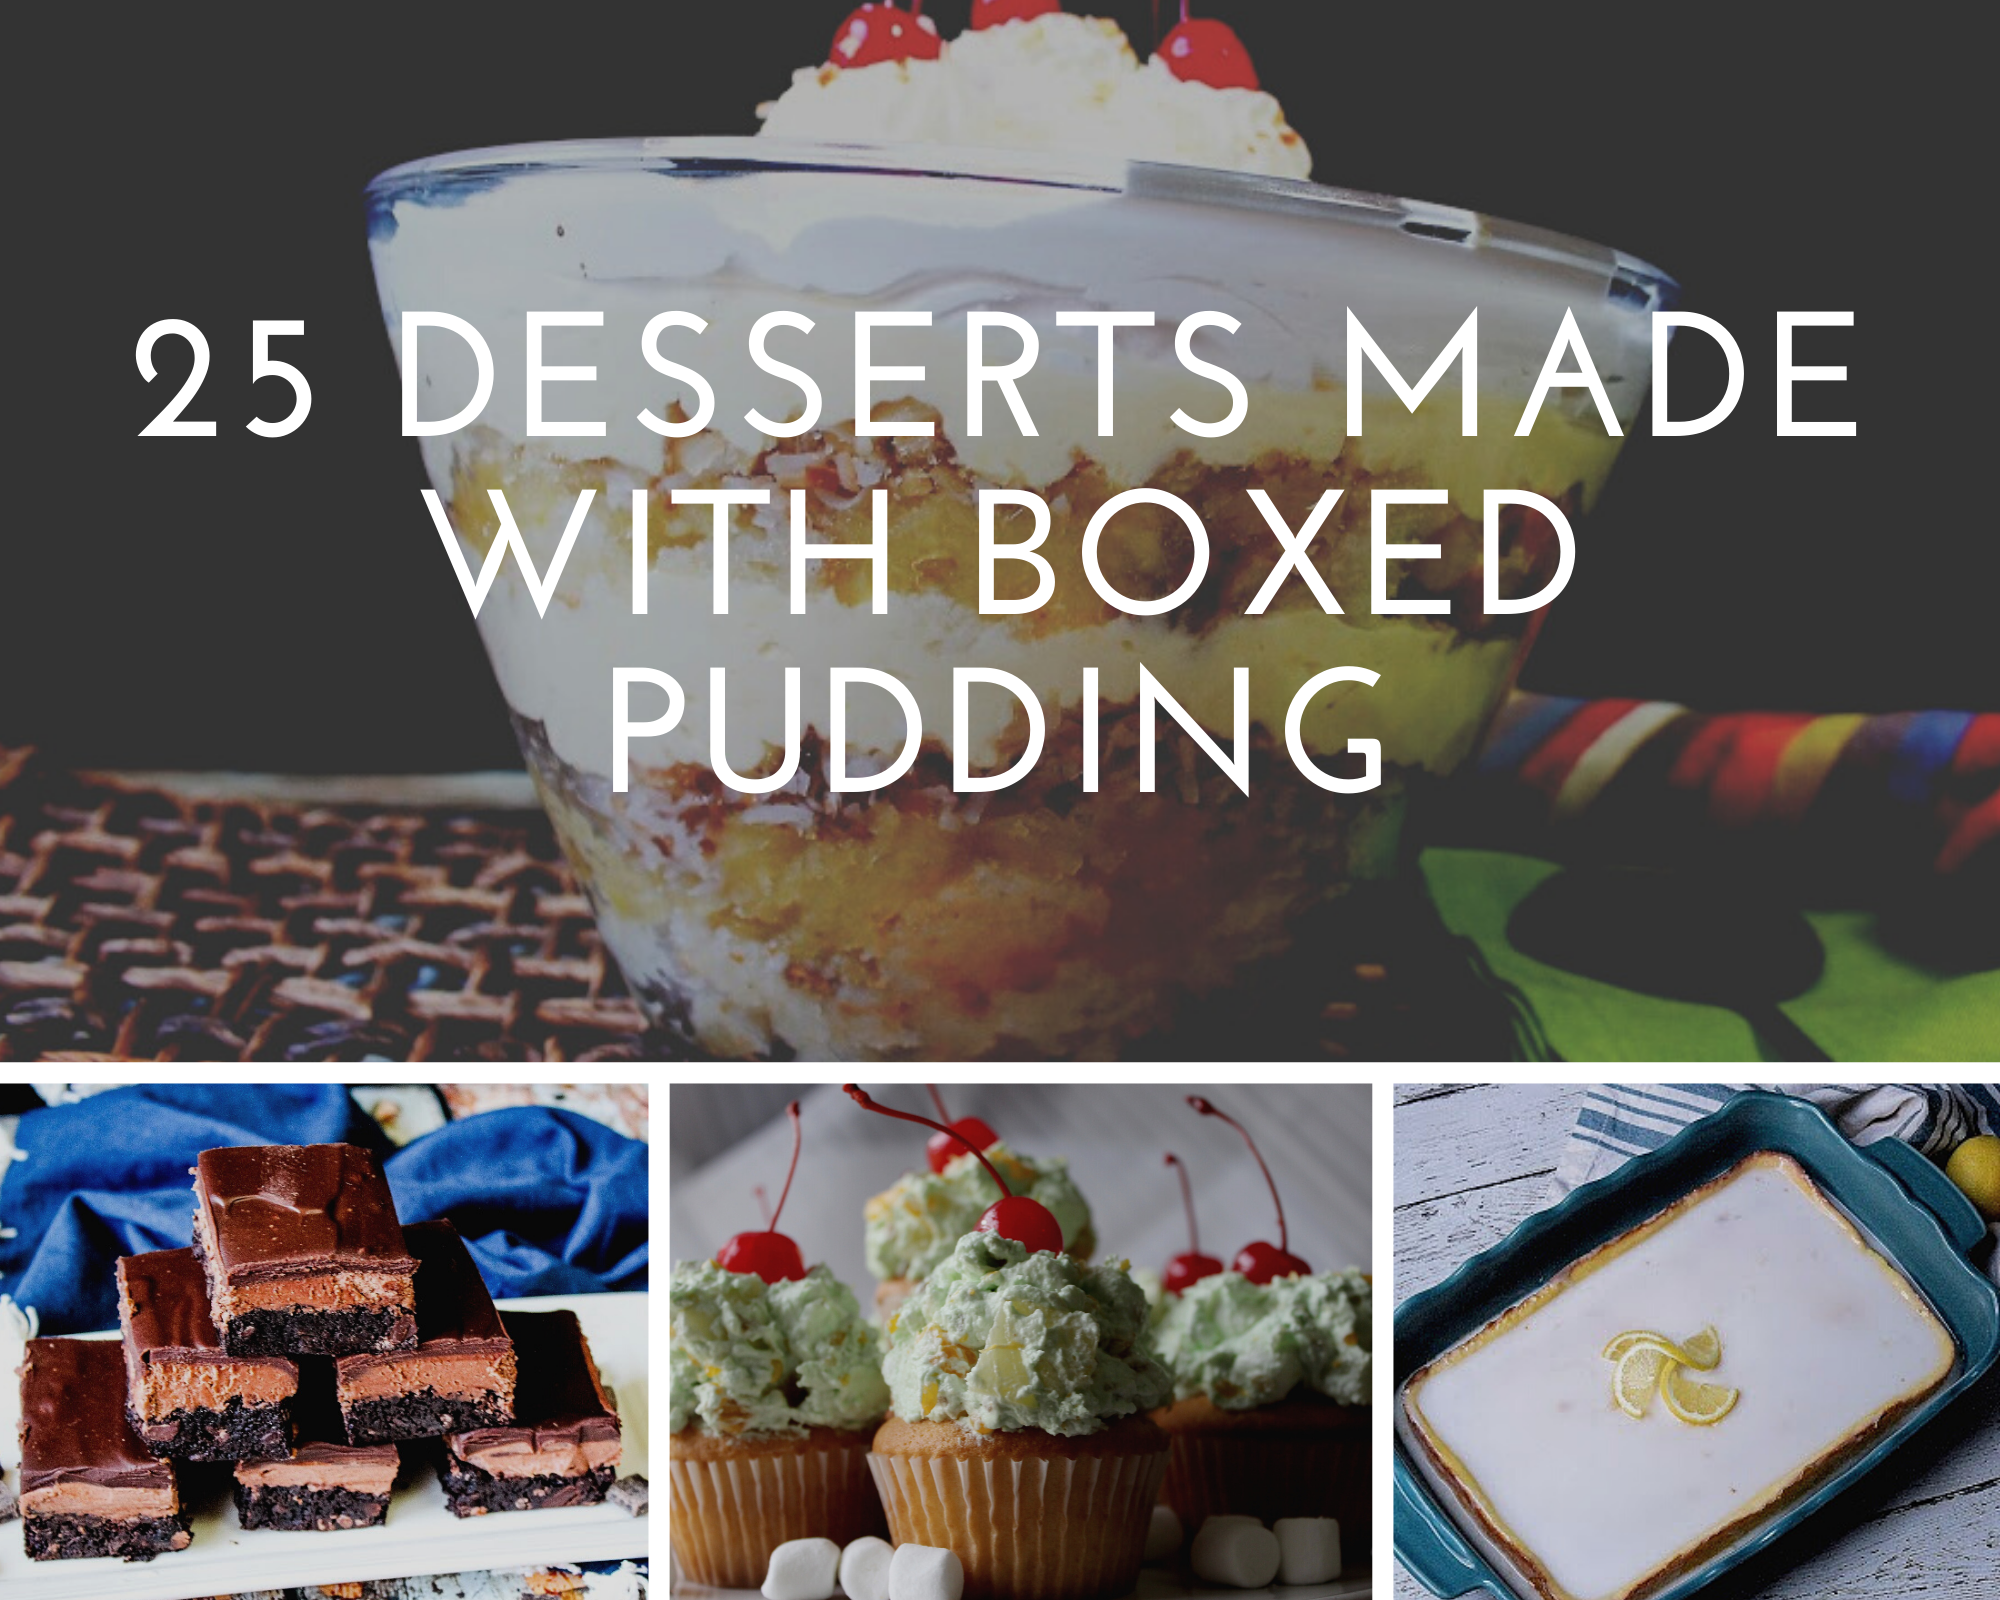 Desserts made with boxed pudding